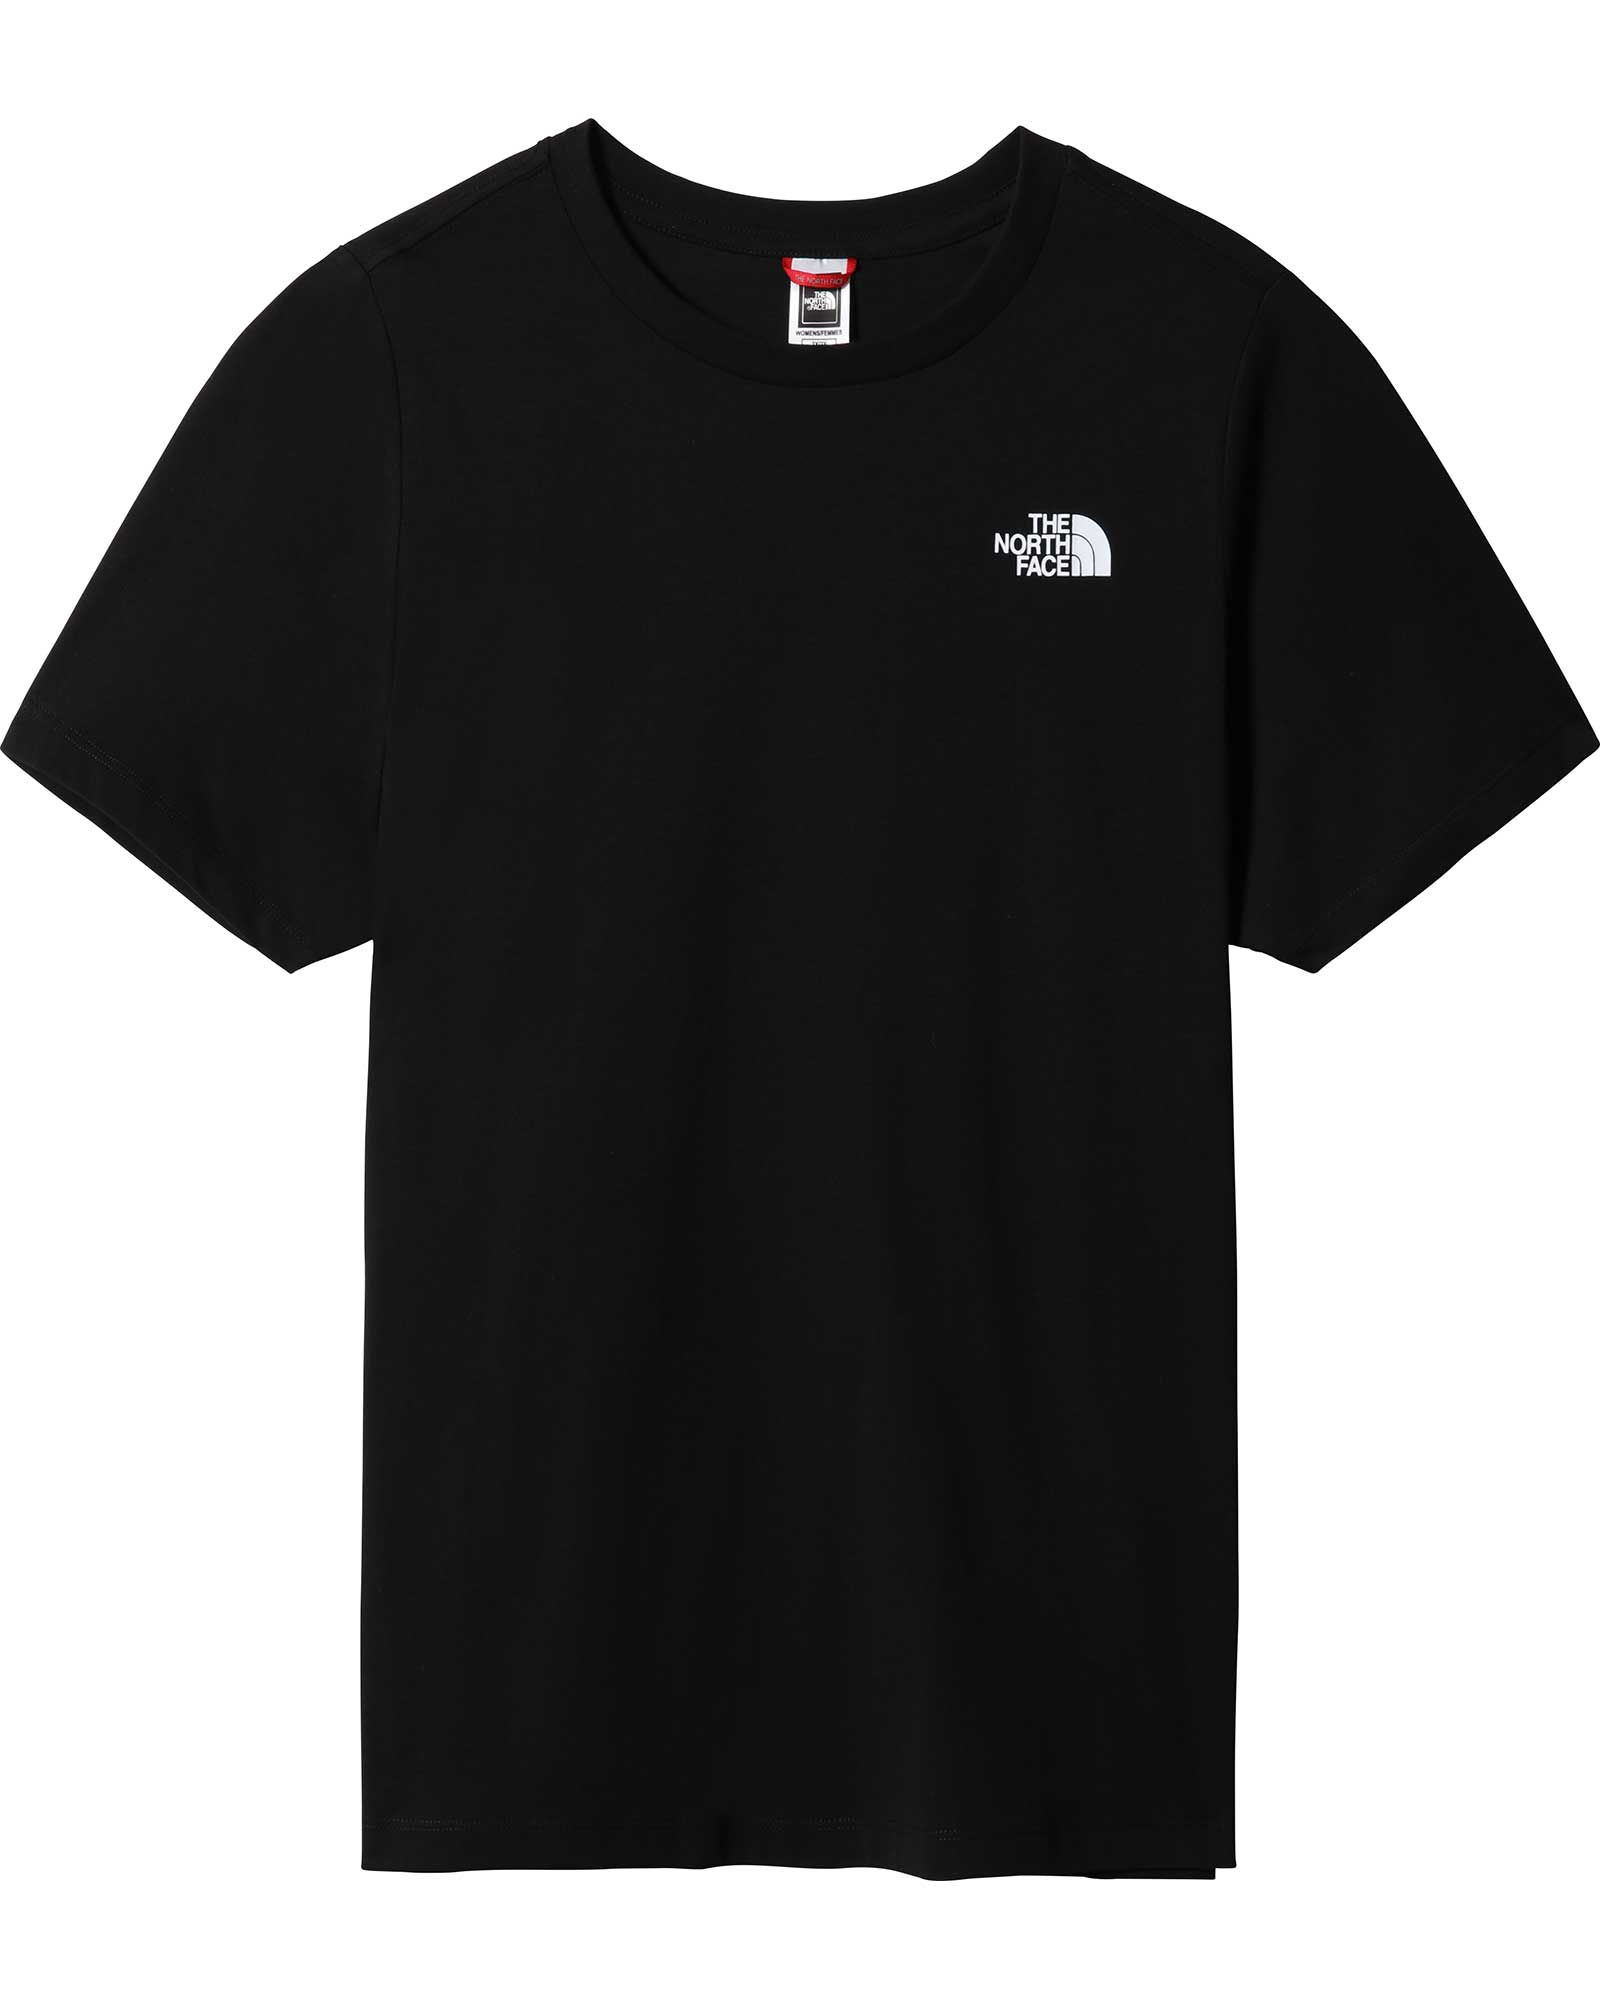 The North Face Plus Simple Dome Women’s T Shirt - TNF Black 2X